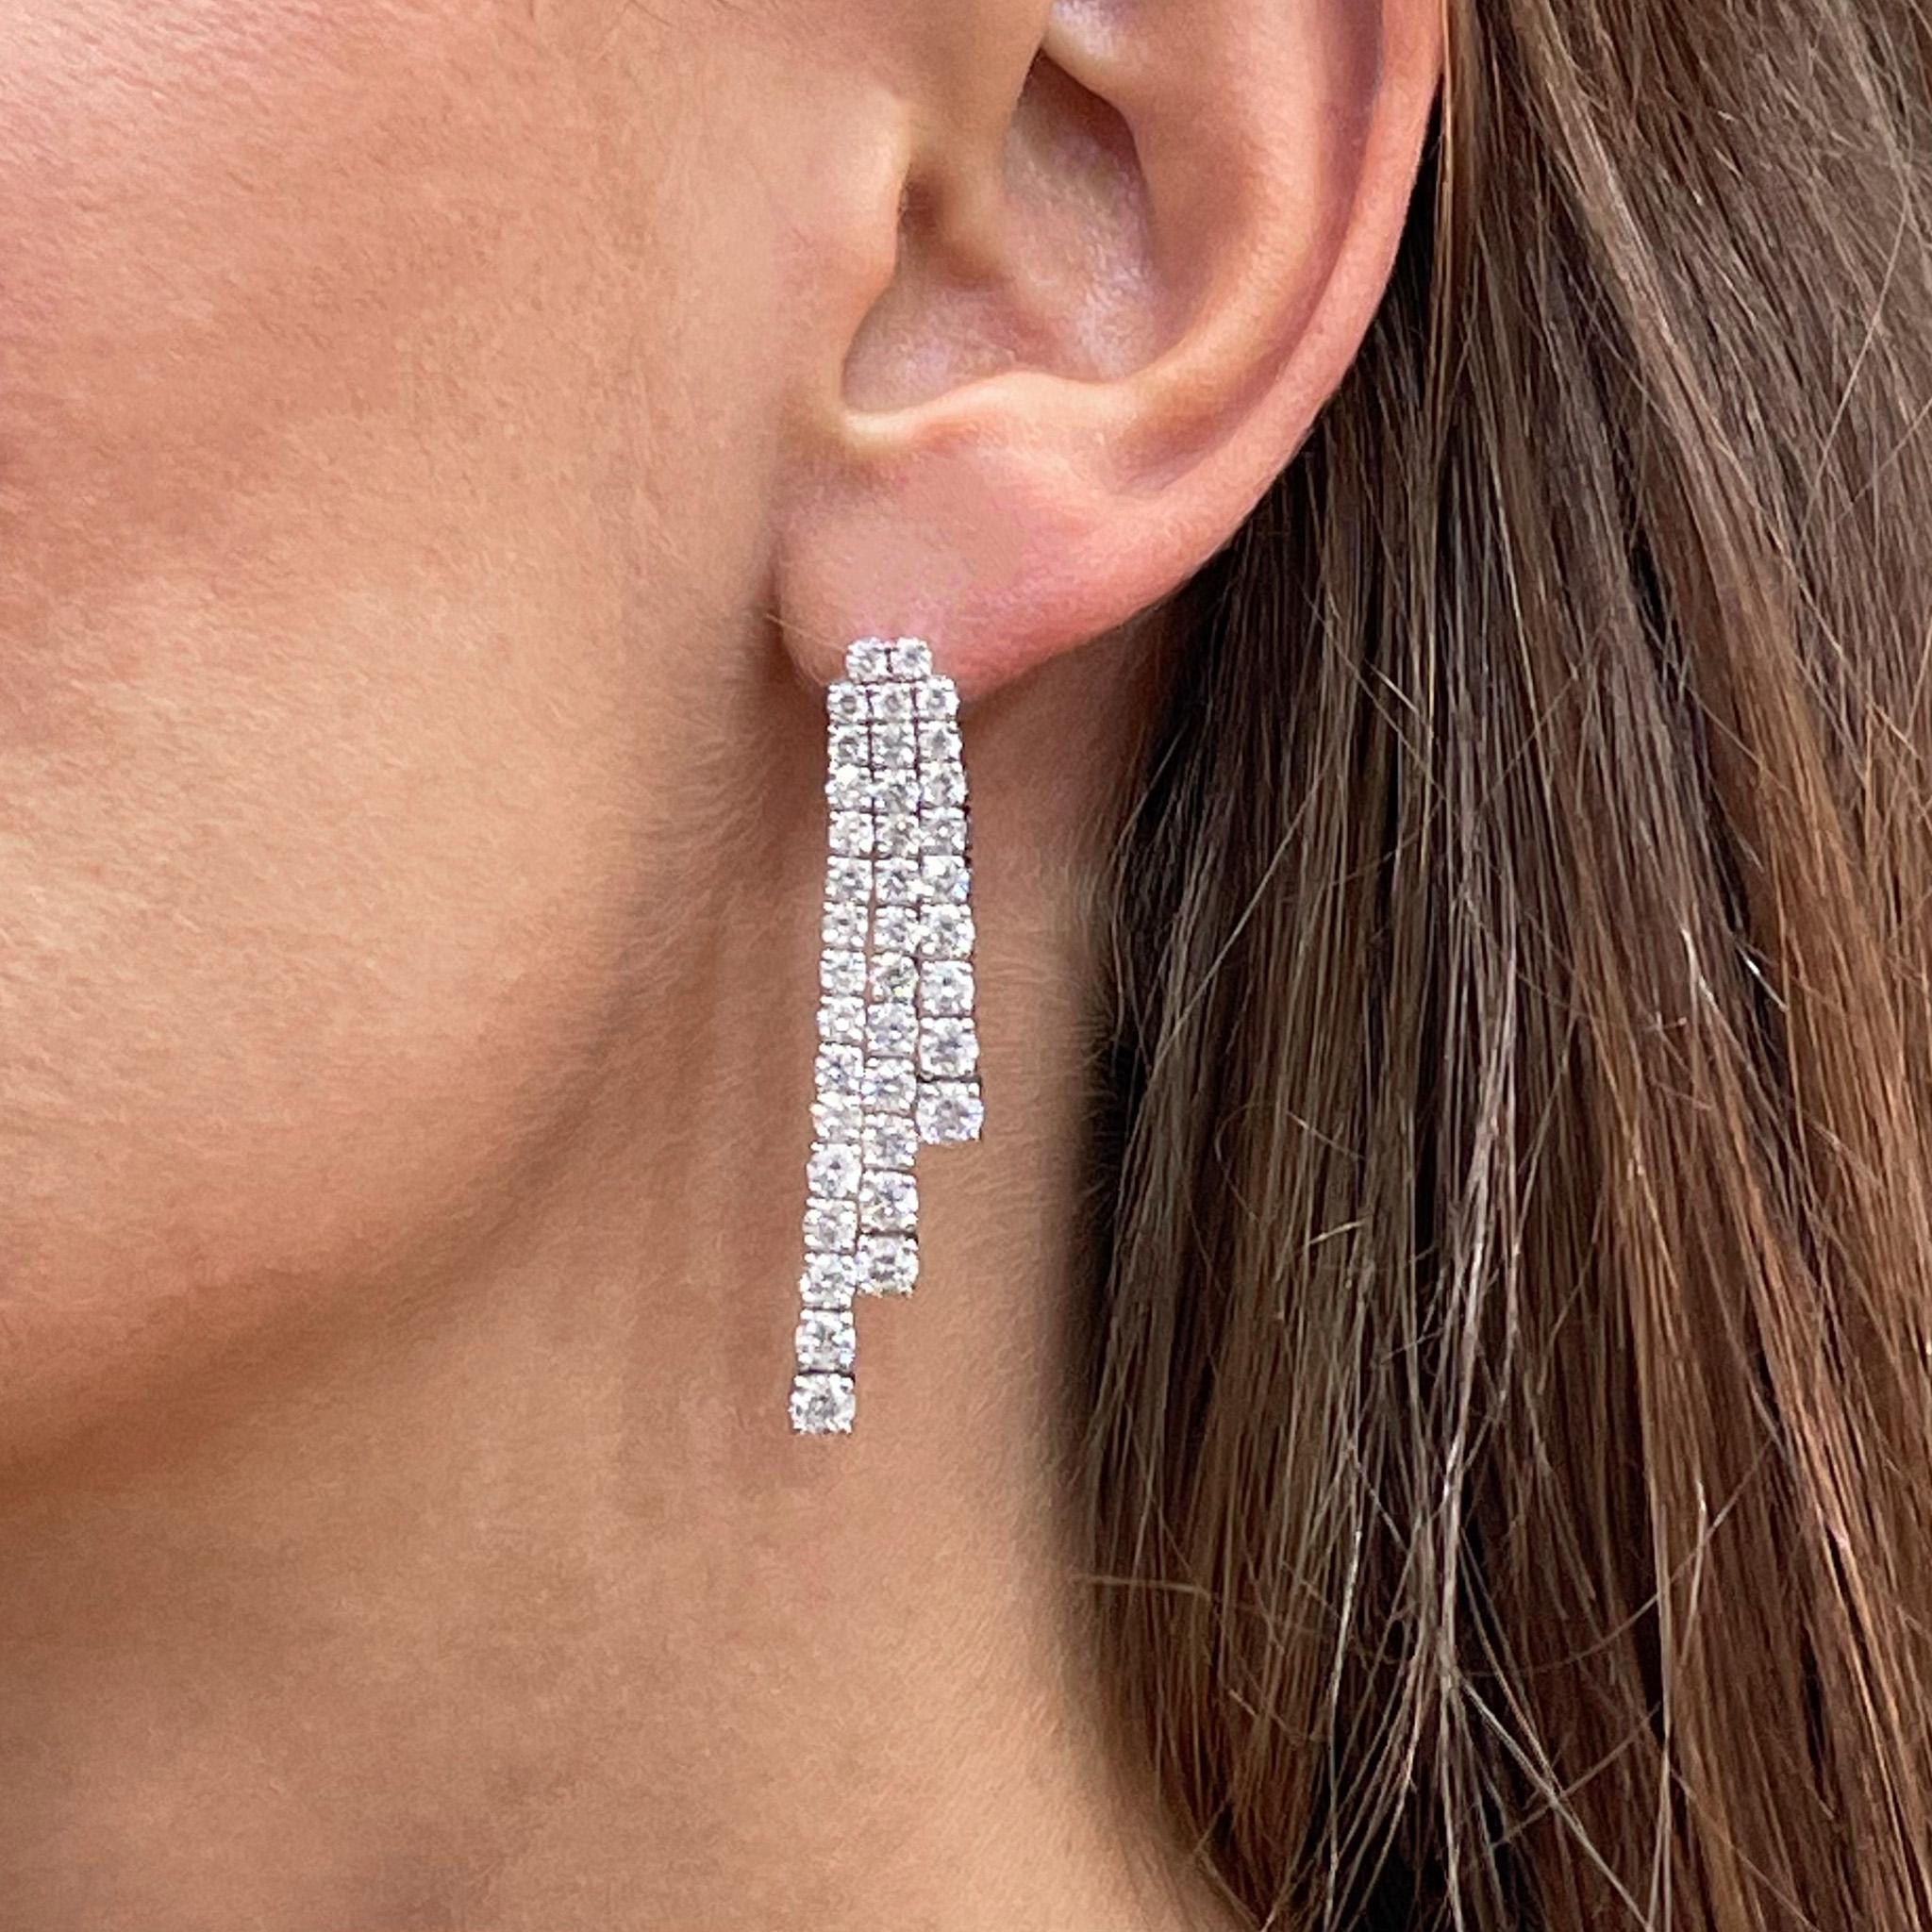 Beautiful Dangle Earrings Set With Round Diamonds. It comes with an appraisal by GIA G.G.
Total Carat Weight is 7.75 Carats
Diamonds Color is F-G
Diamonds Clarity is VVS-VS
Metal is 18K White Gold